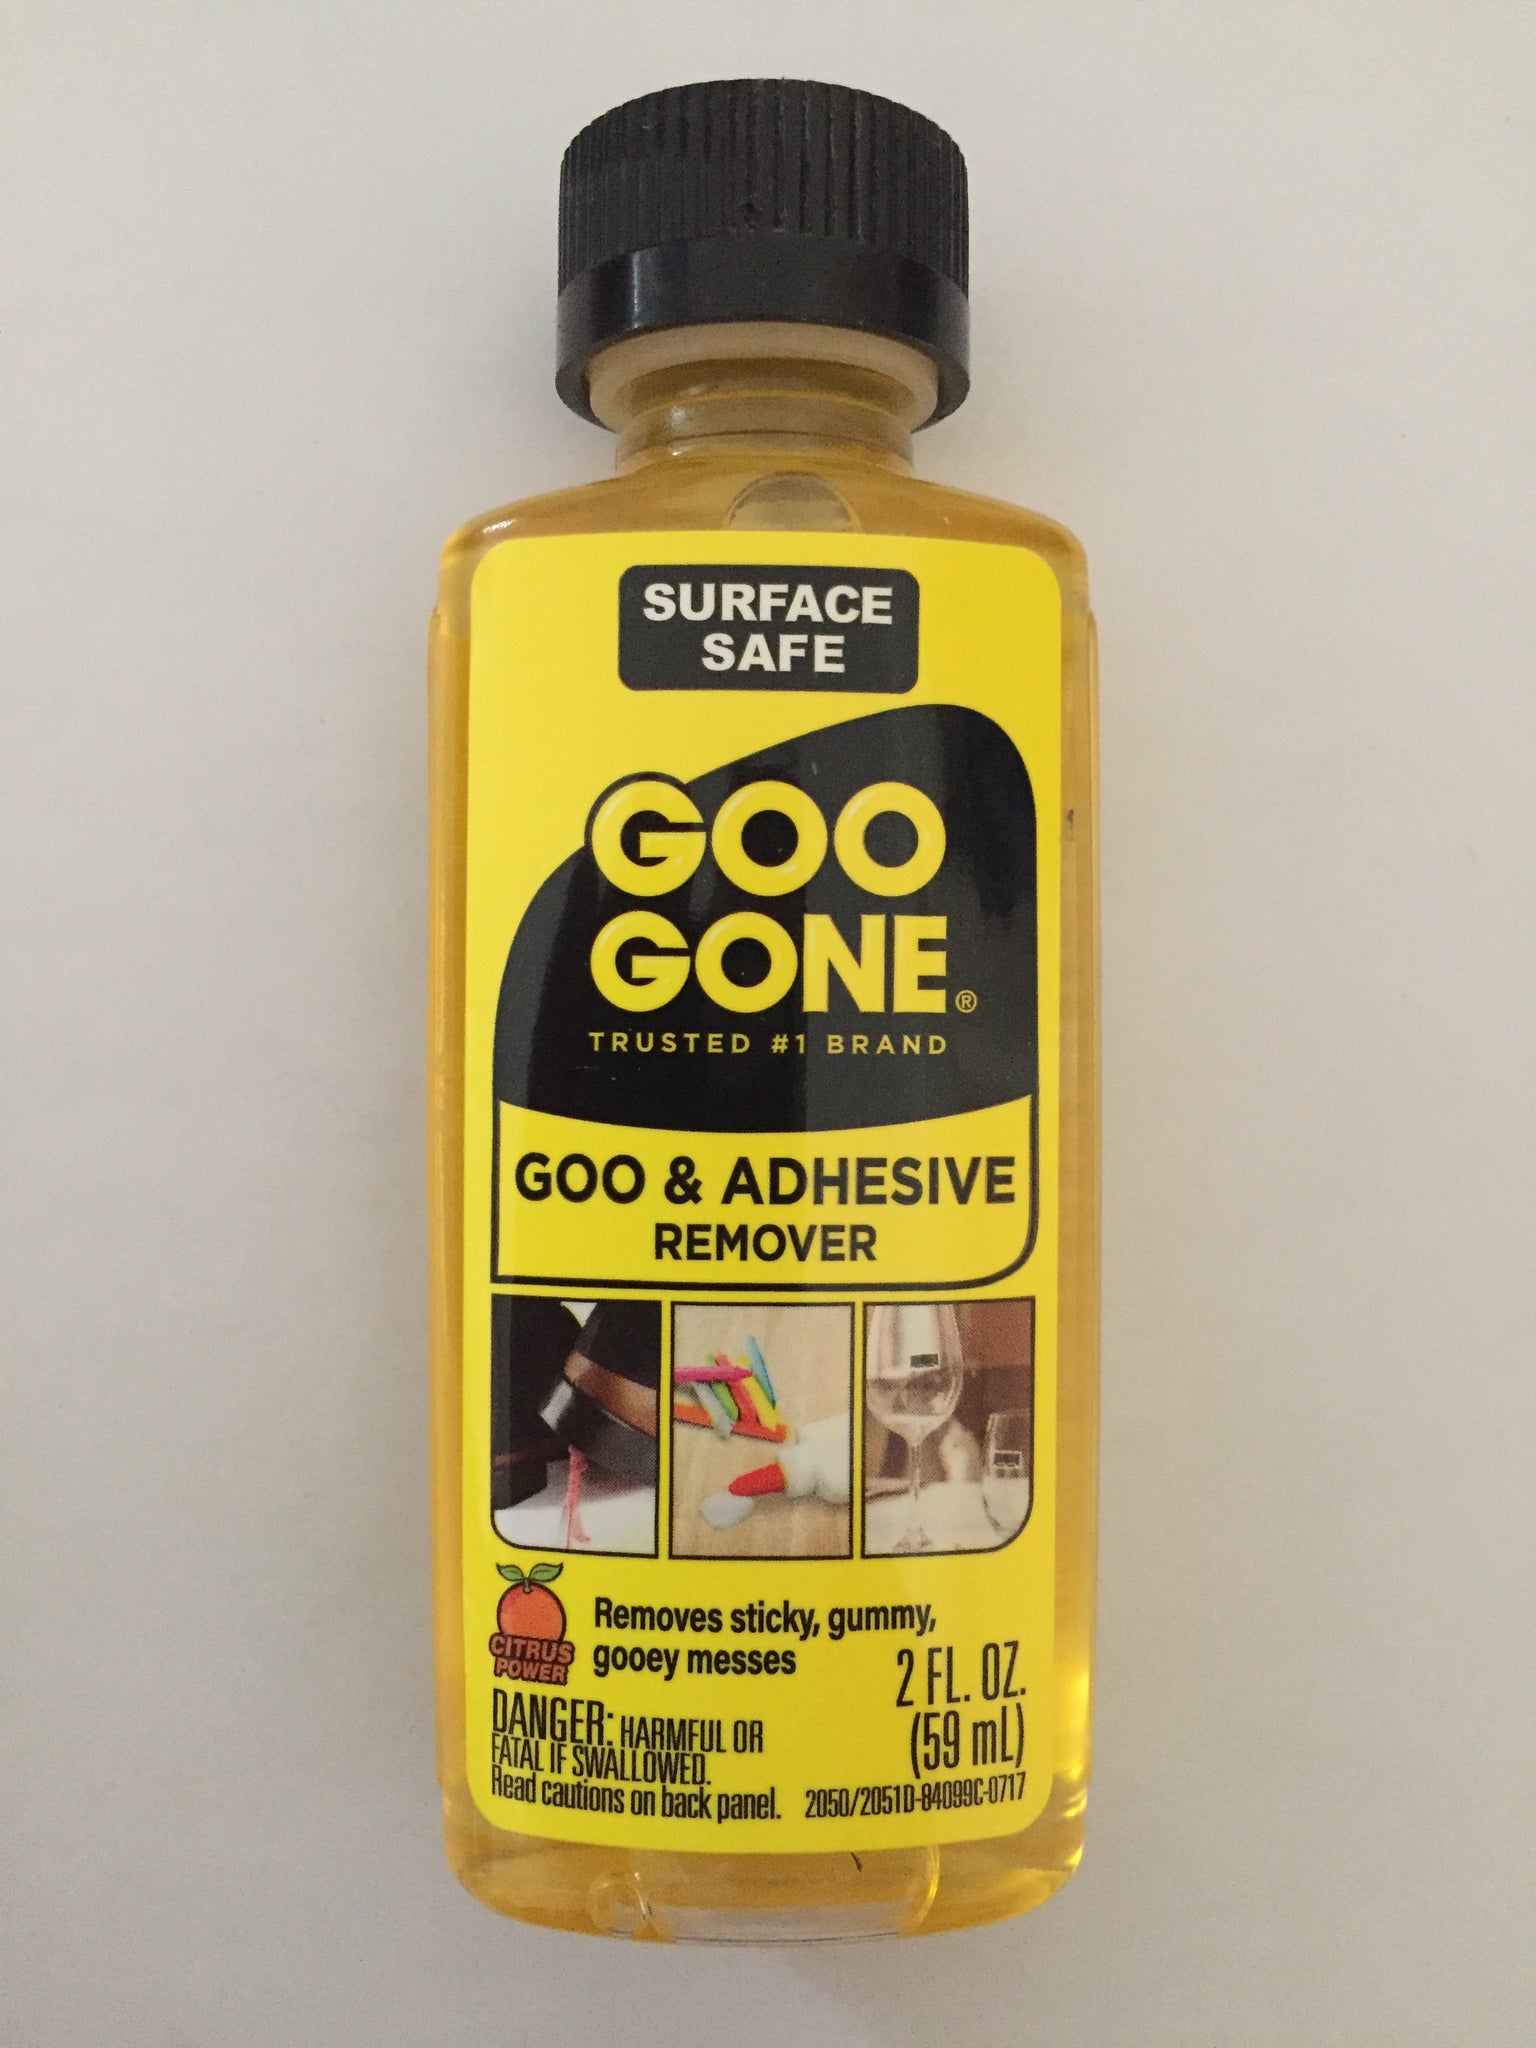 Which Goo Gone Product Should I Use?